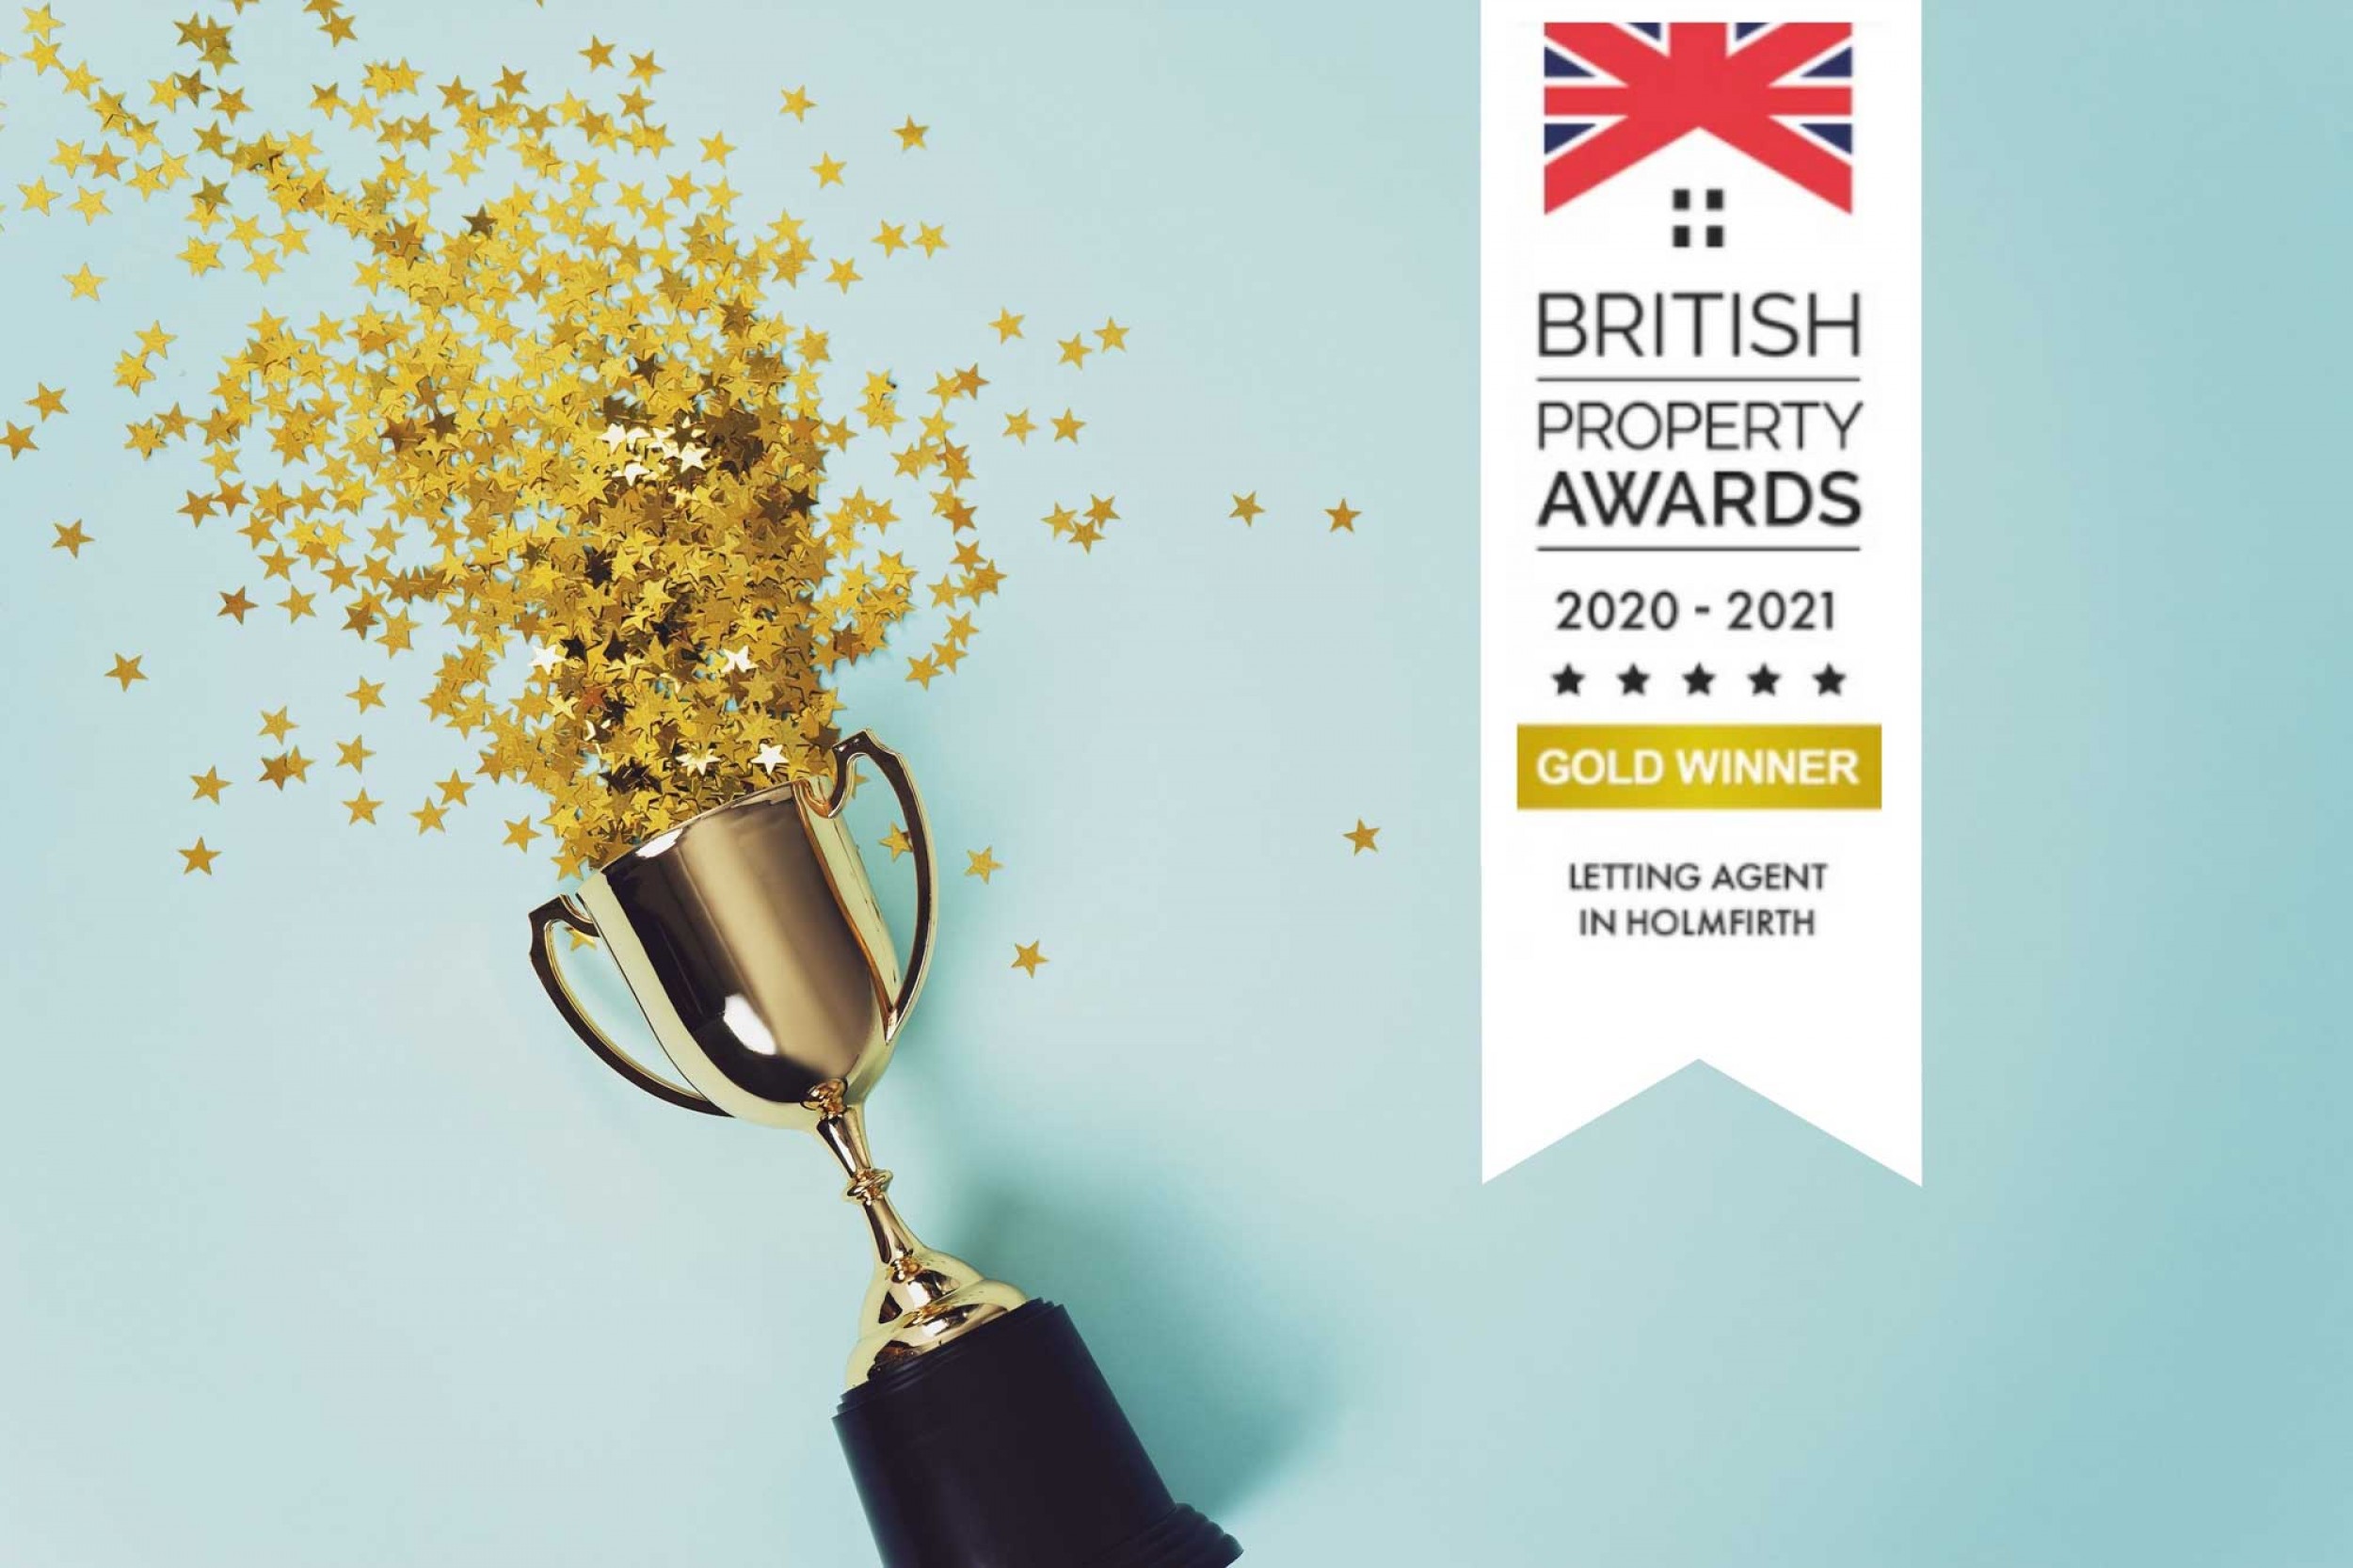 Applegate Properties secures the gold in the British Property Awards